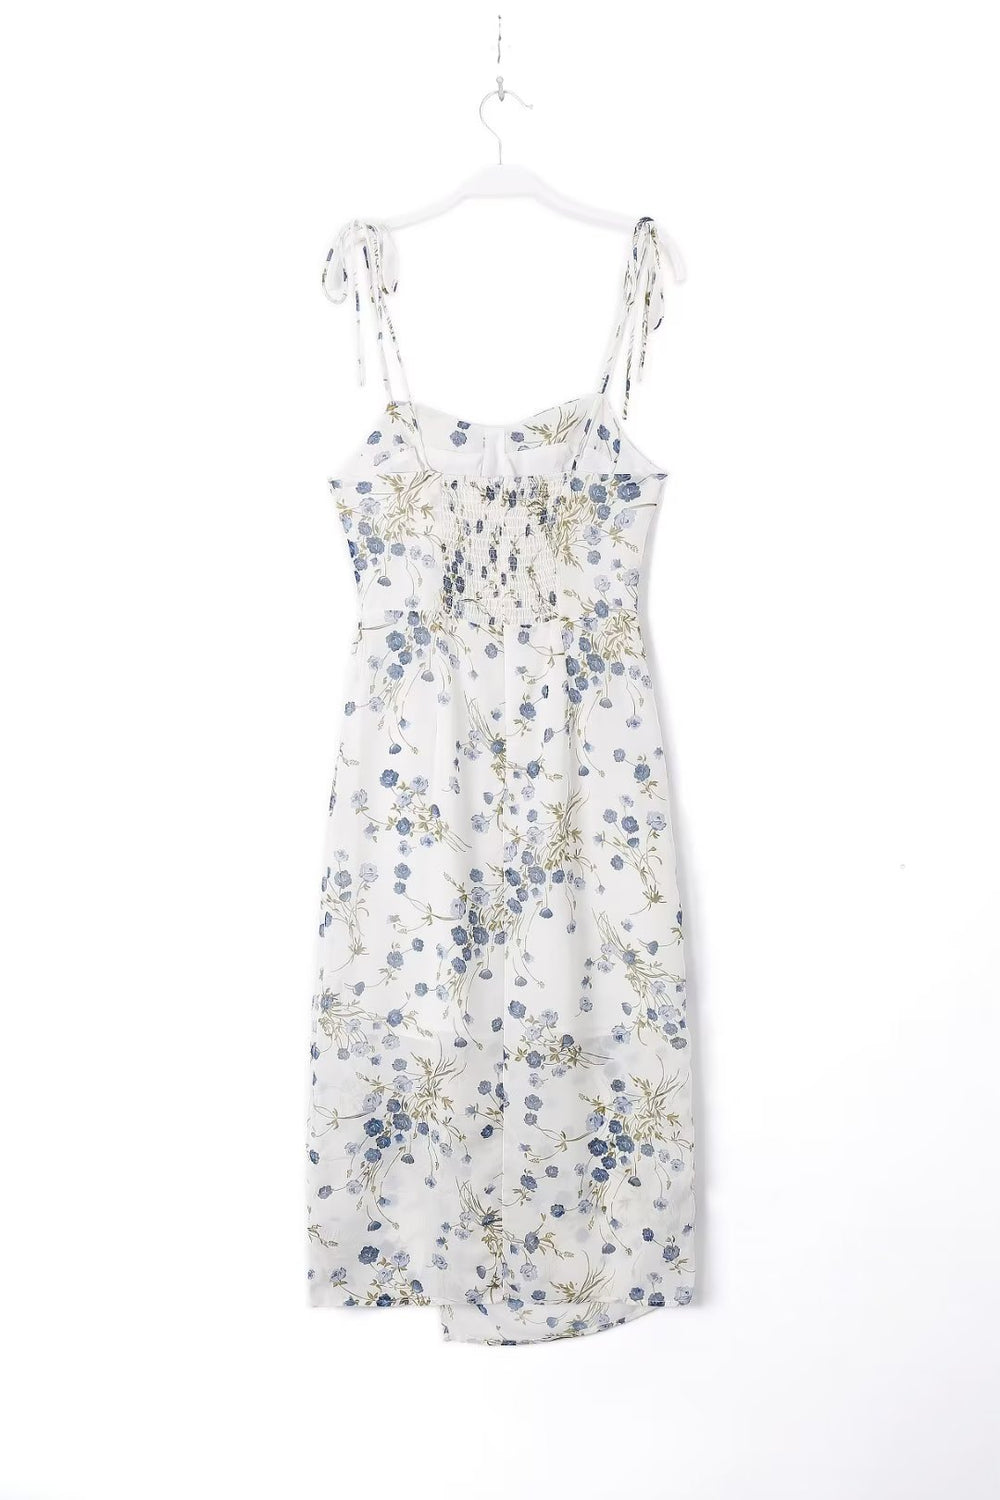 Summer Casual Vacation Floral Printing on White Background Sleeveless Split Dress Sexy Dress